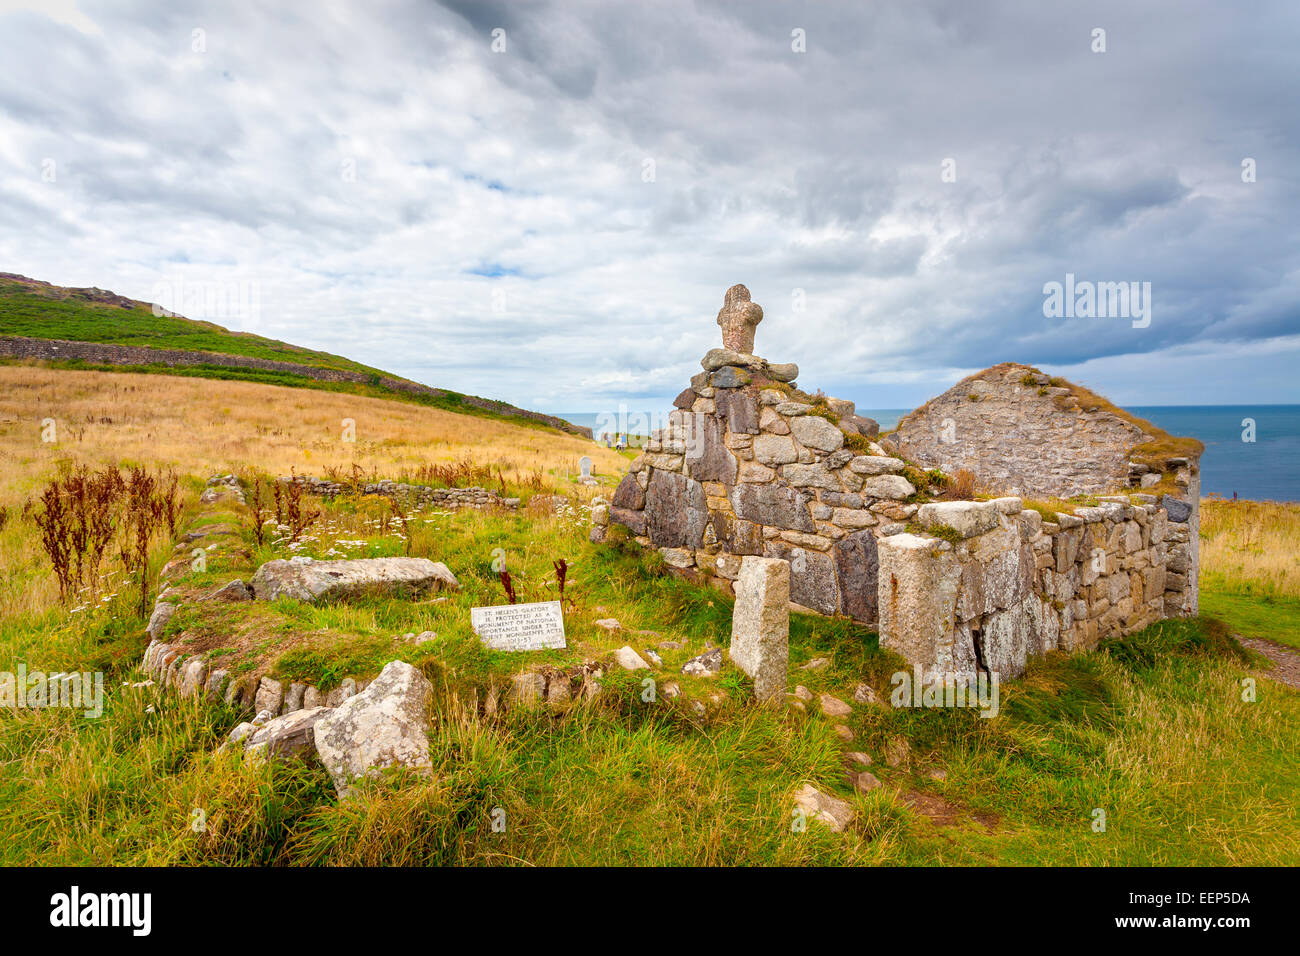 Ruins of St Helens Oratory an early Christian structure at Cape Cornwall near St Just Cornwall England UK Europe Stock Photo